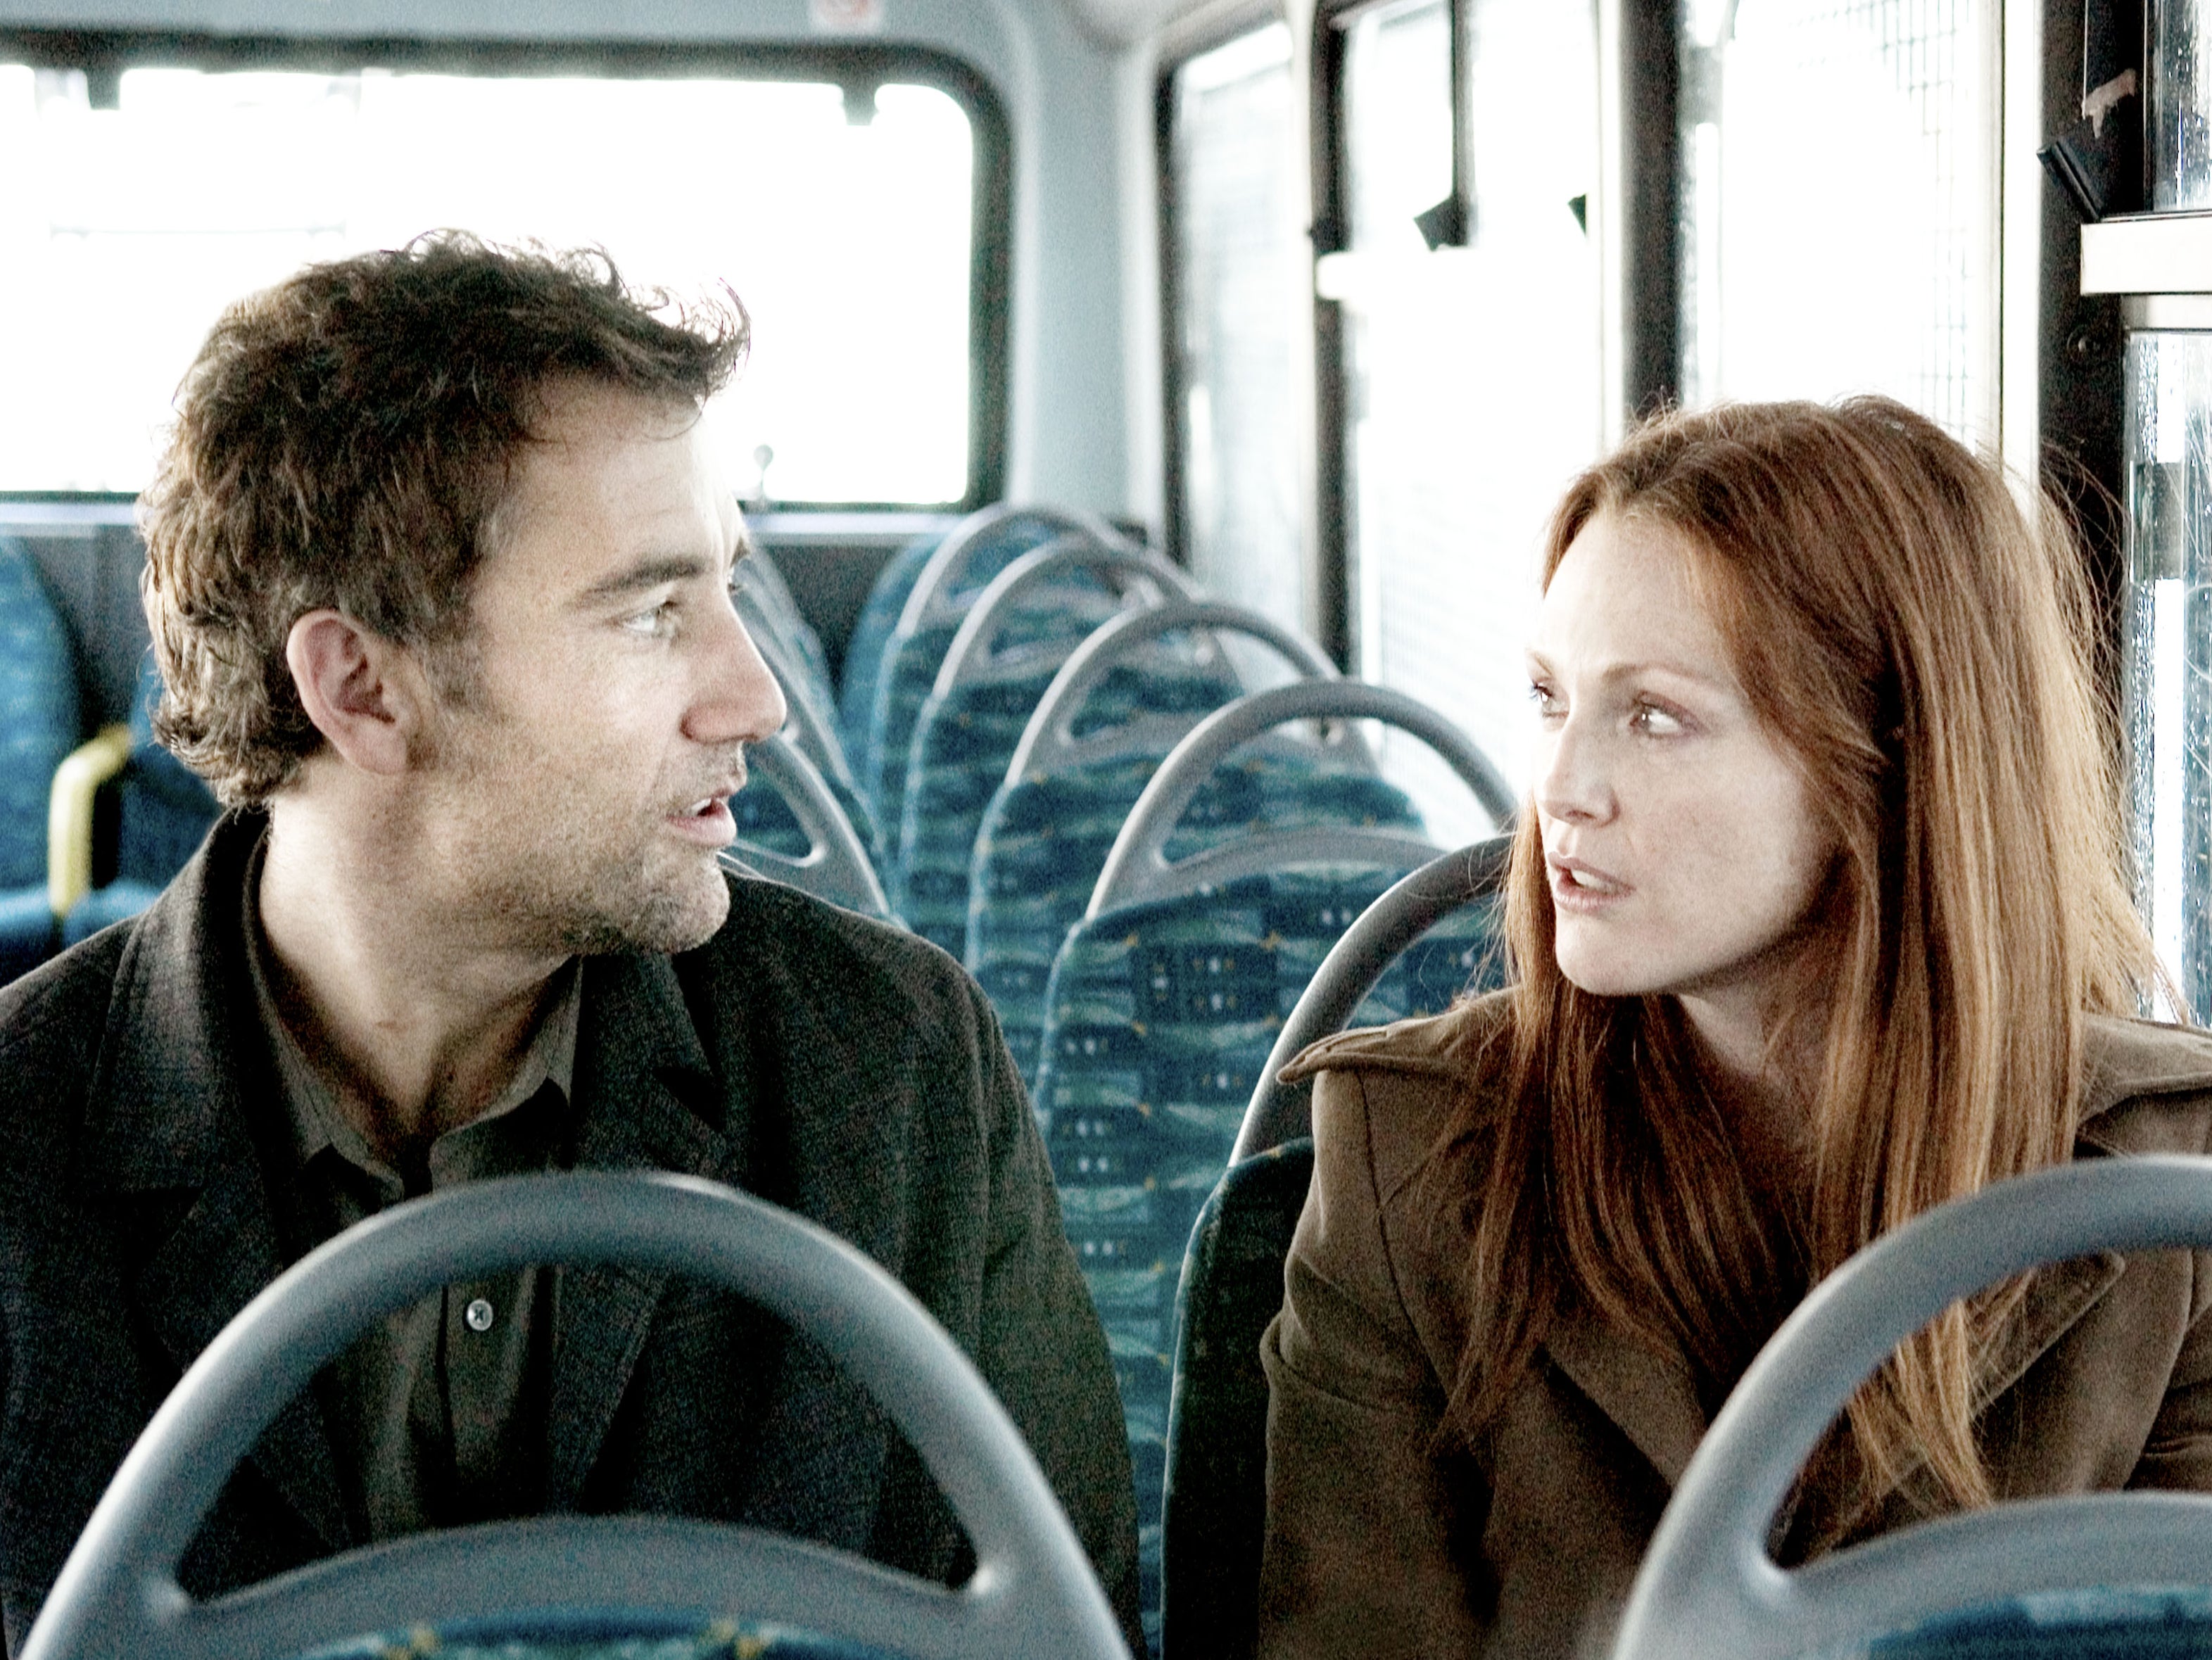 Clive Owen and Julianne Moore in Alfonso Cuarón’s ‘Children of Men’